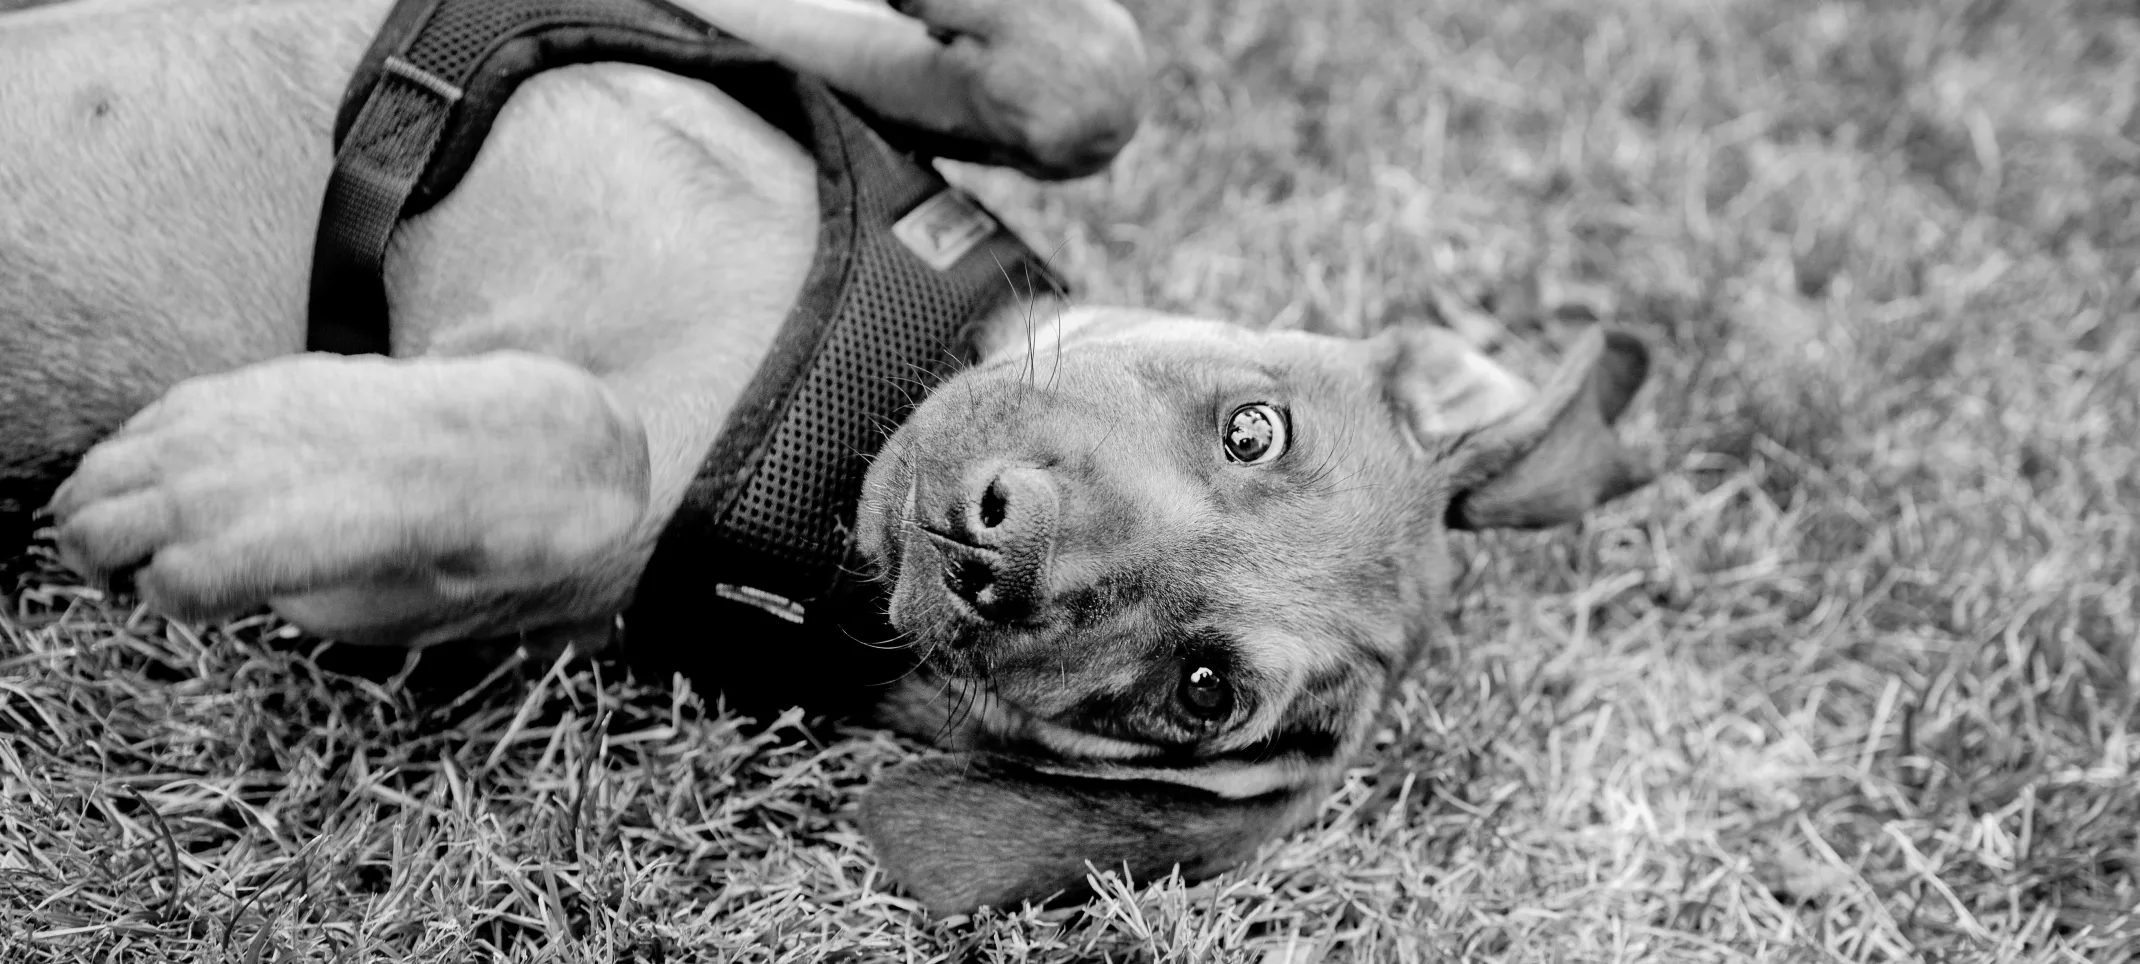 Black and white photo of a dog wearing a harness, lying in grass